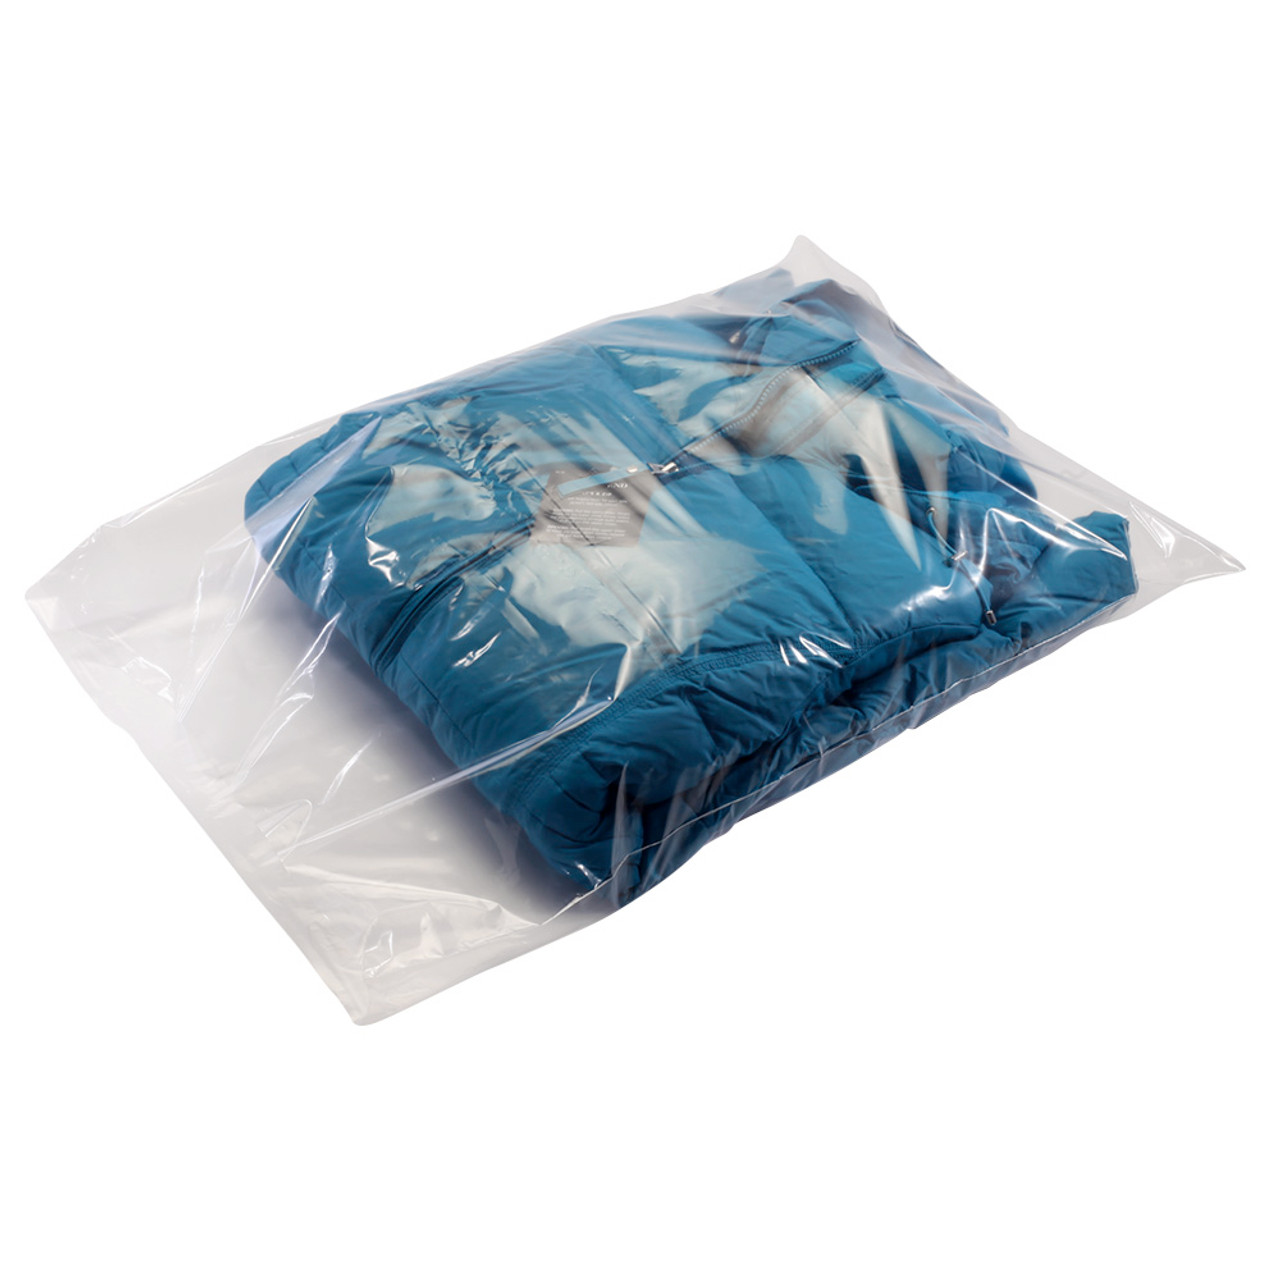 24X30 - 1.5 mil - clear - layflat poly bags - 500 bags/case